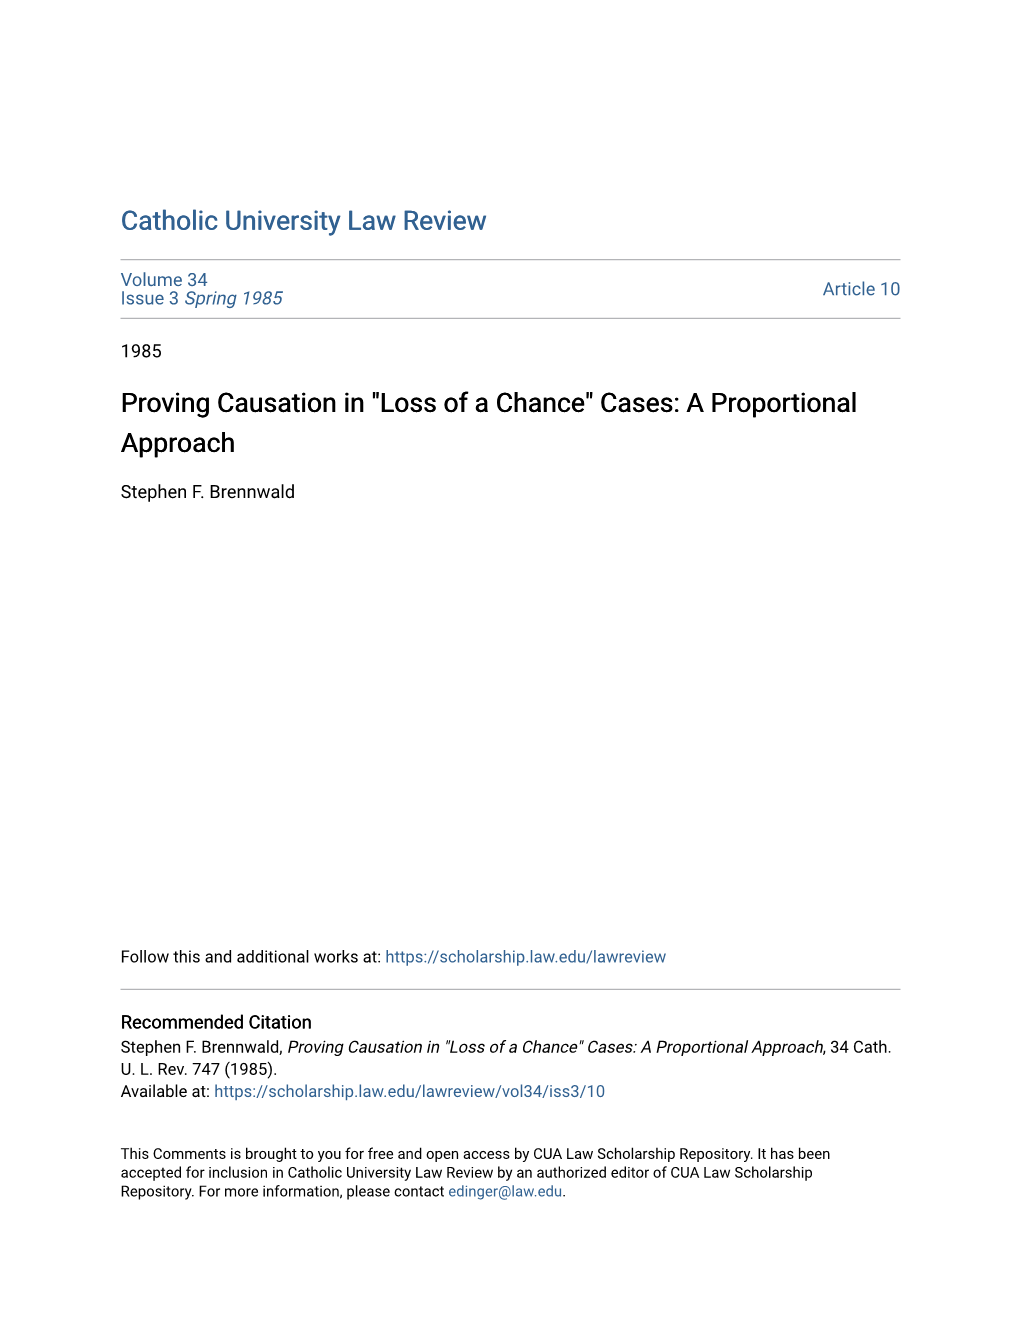 Proving Causation in "Loss of a Chance" Cases: a Proportional Approach